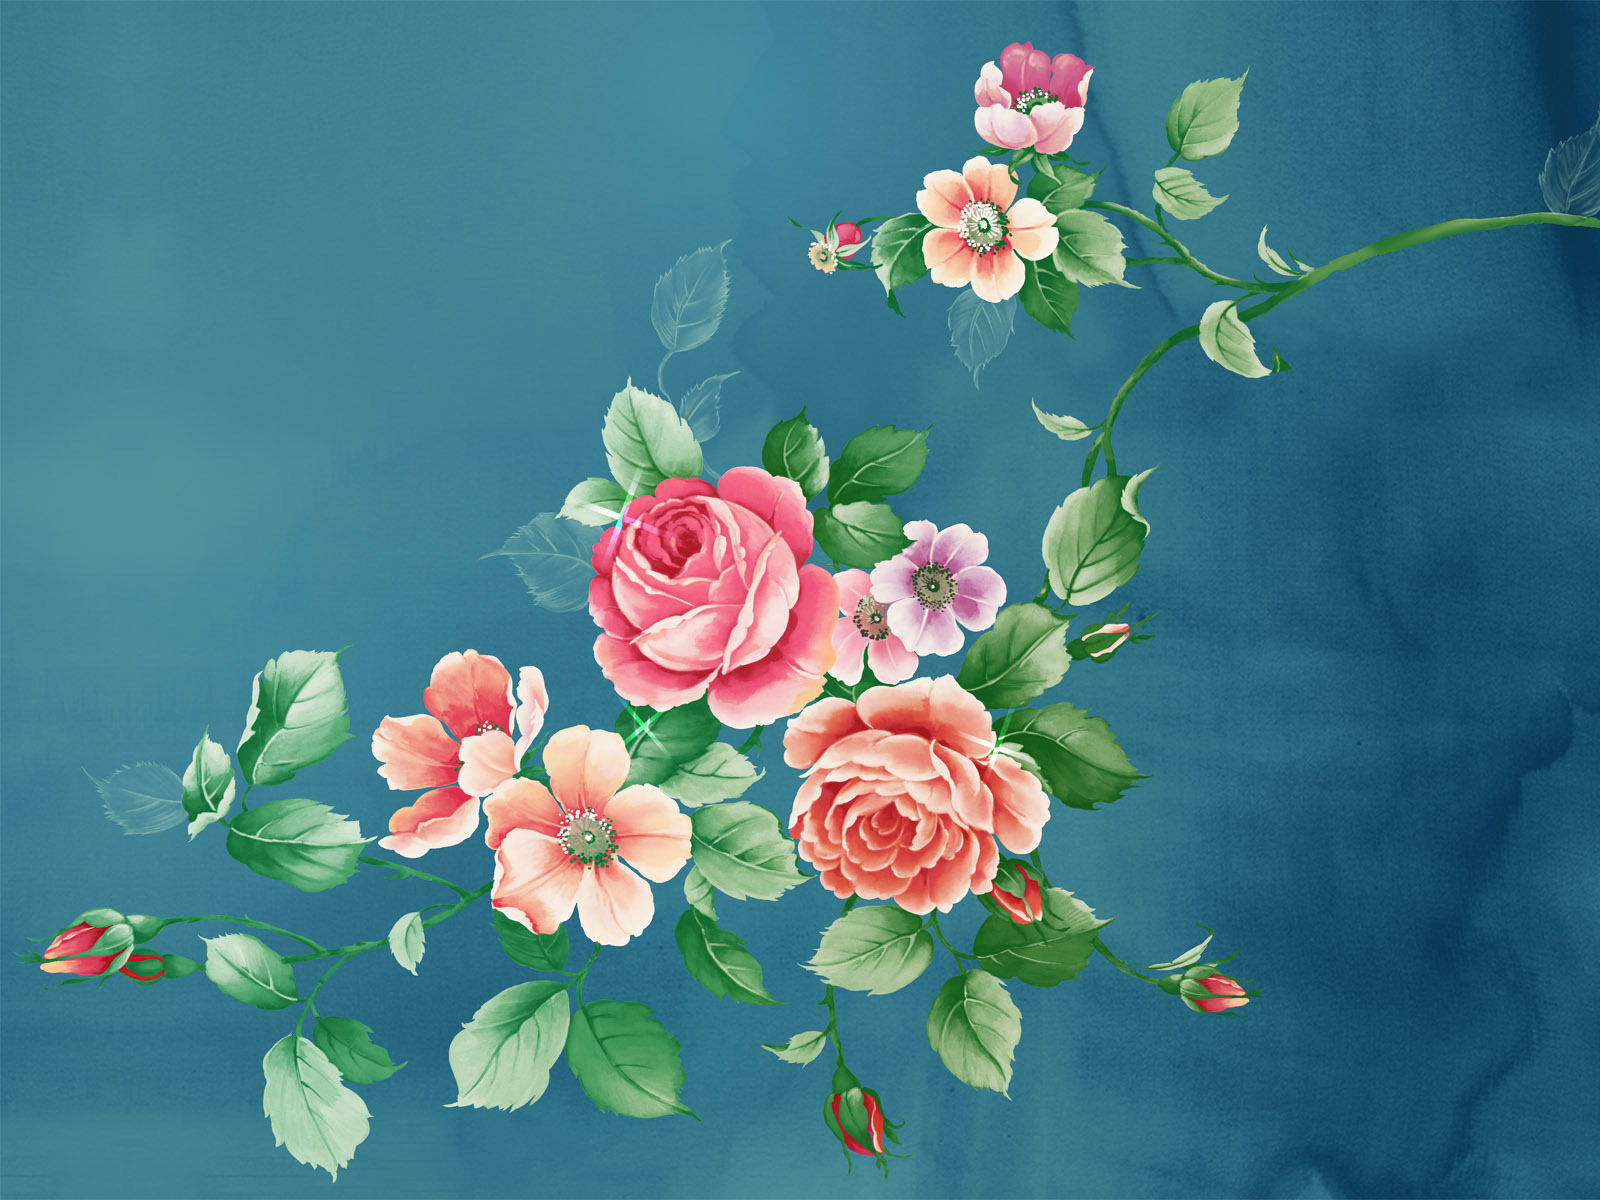 plants, pictures, roses, flowers, turquoise